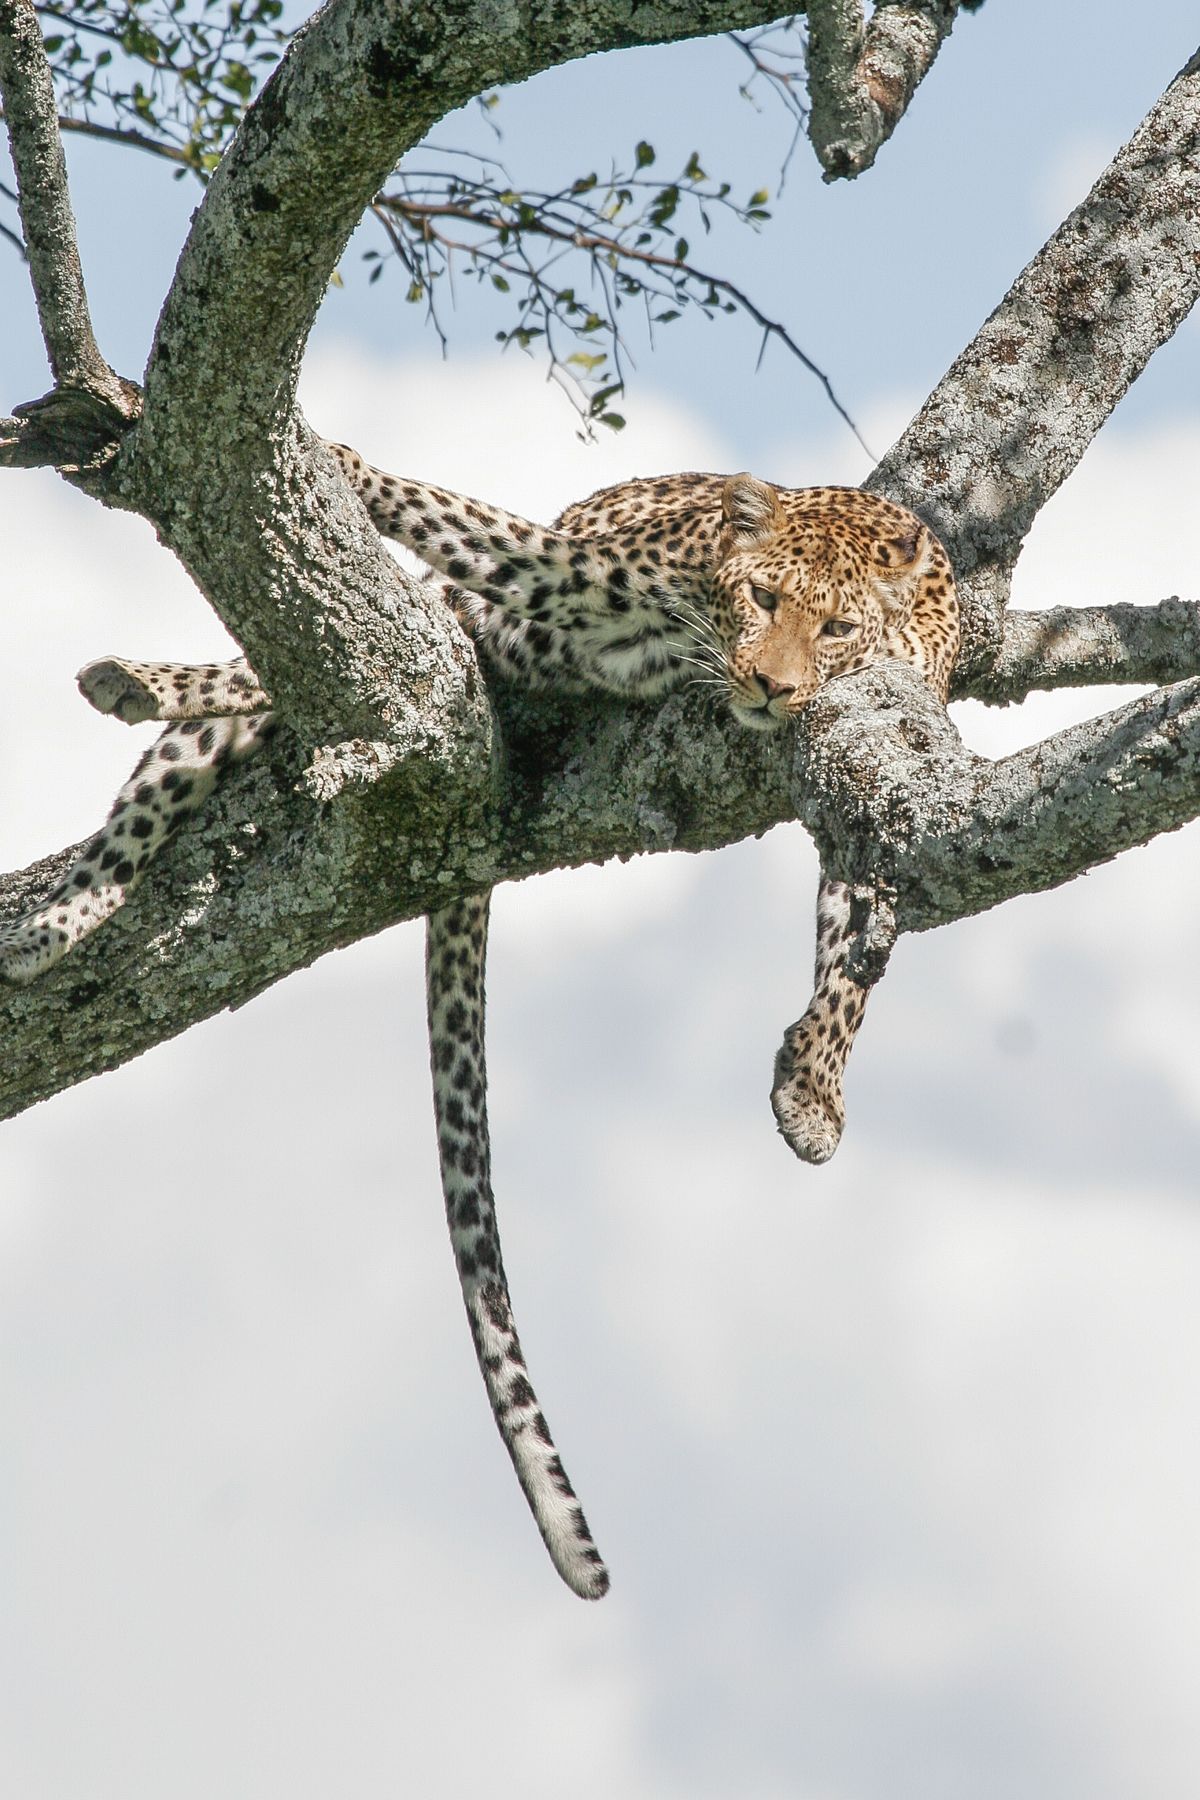 Leopards hunt mostly at night, so much of the day is spent in a shady tree